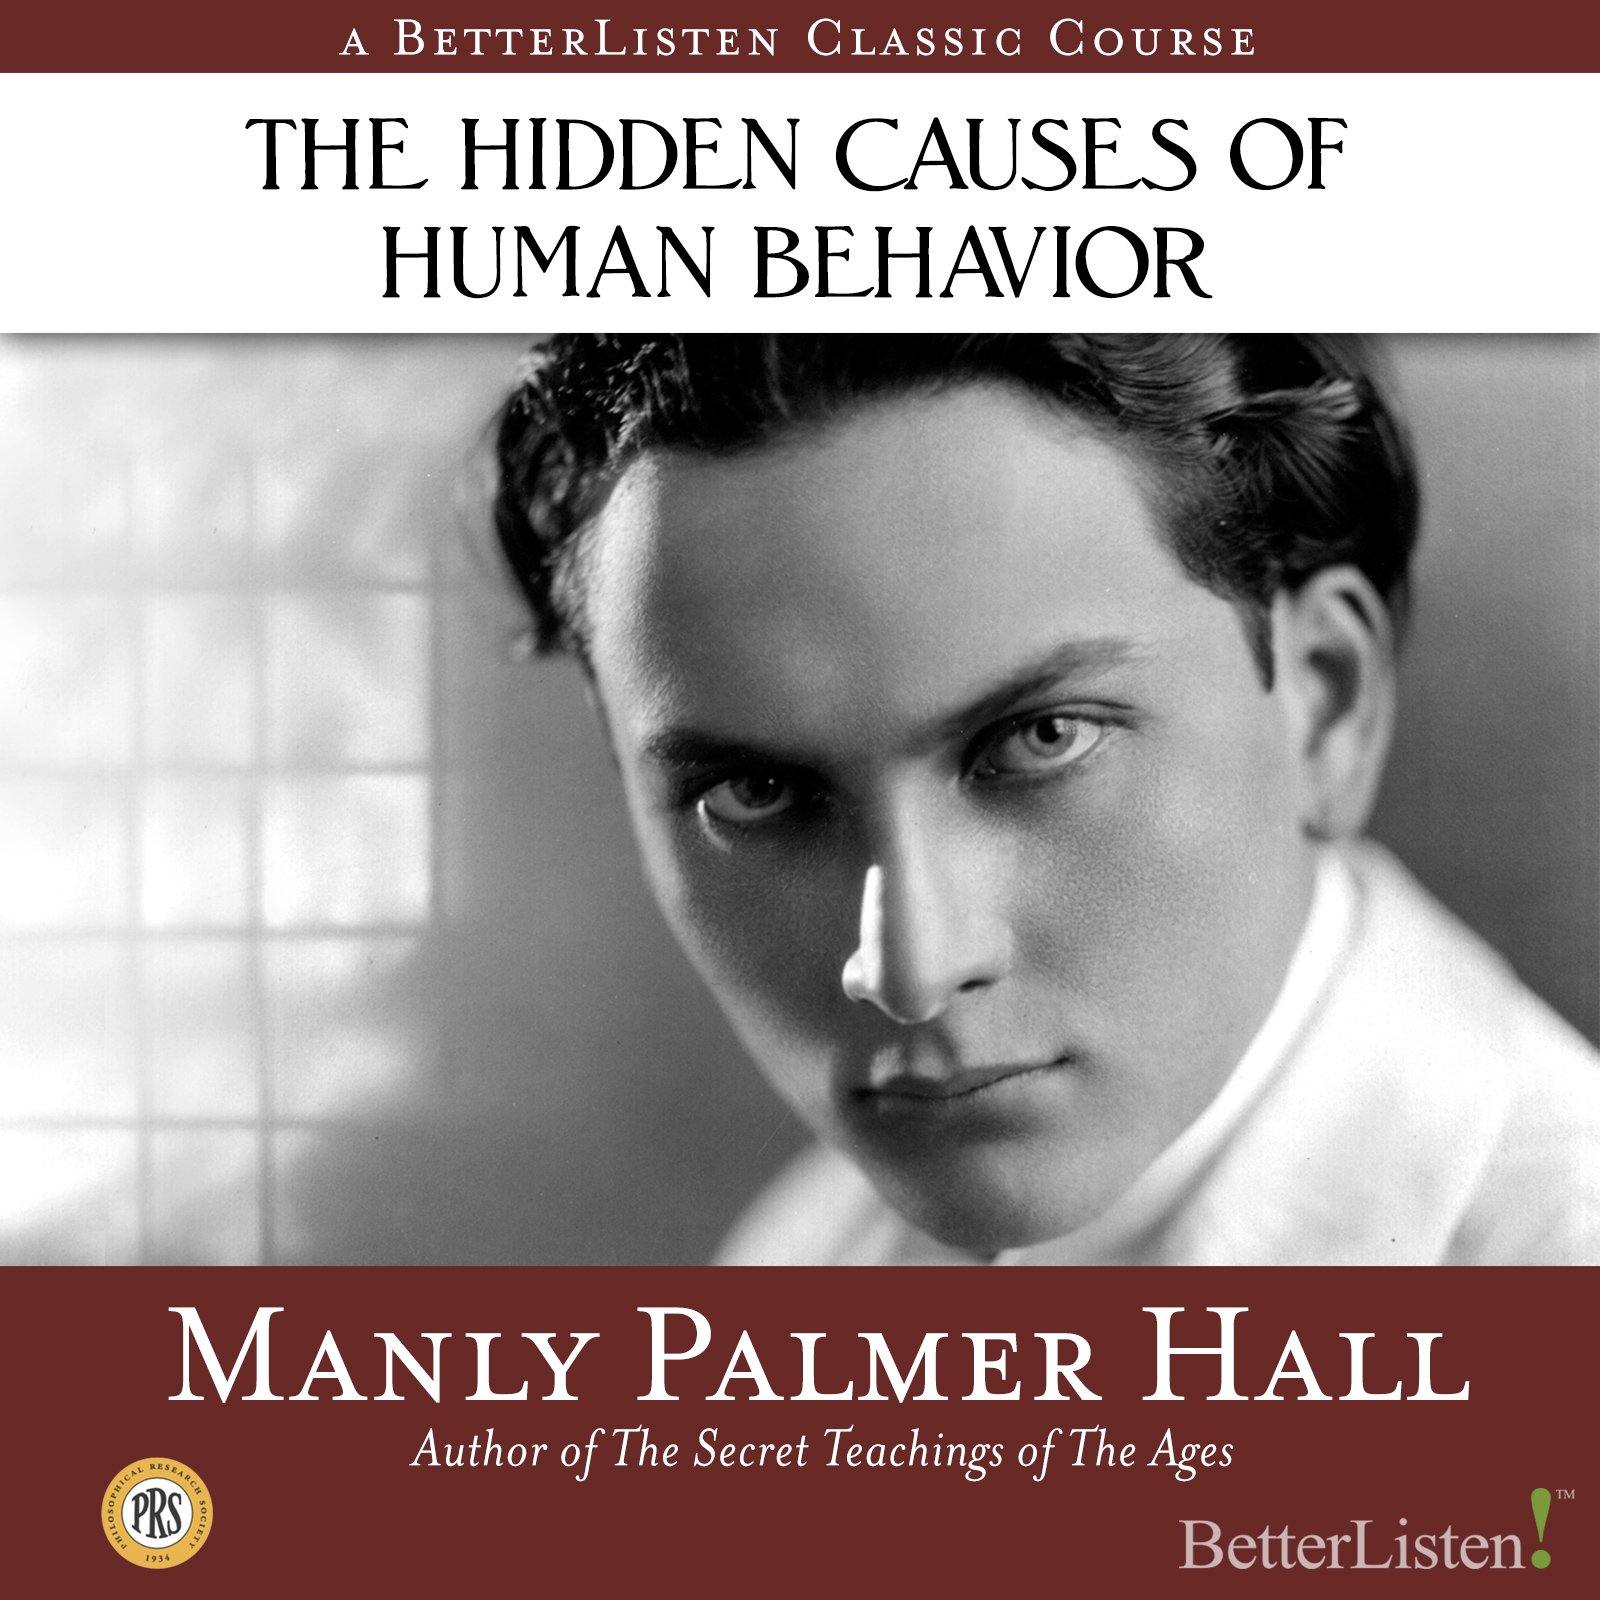 The Hidden Causes of Human Behavior with Manly P. Hall - BetterListen!